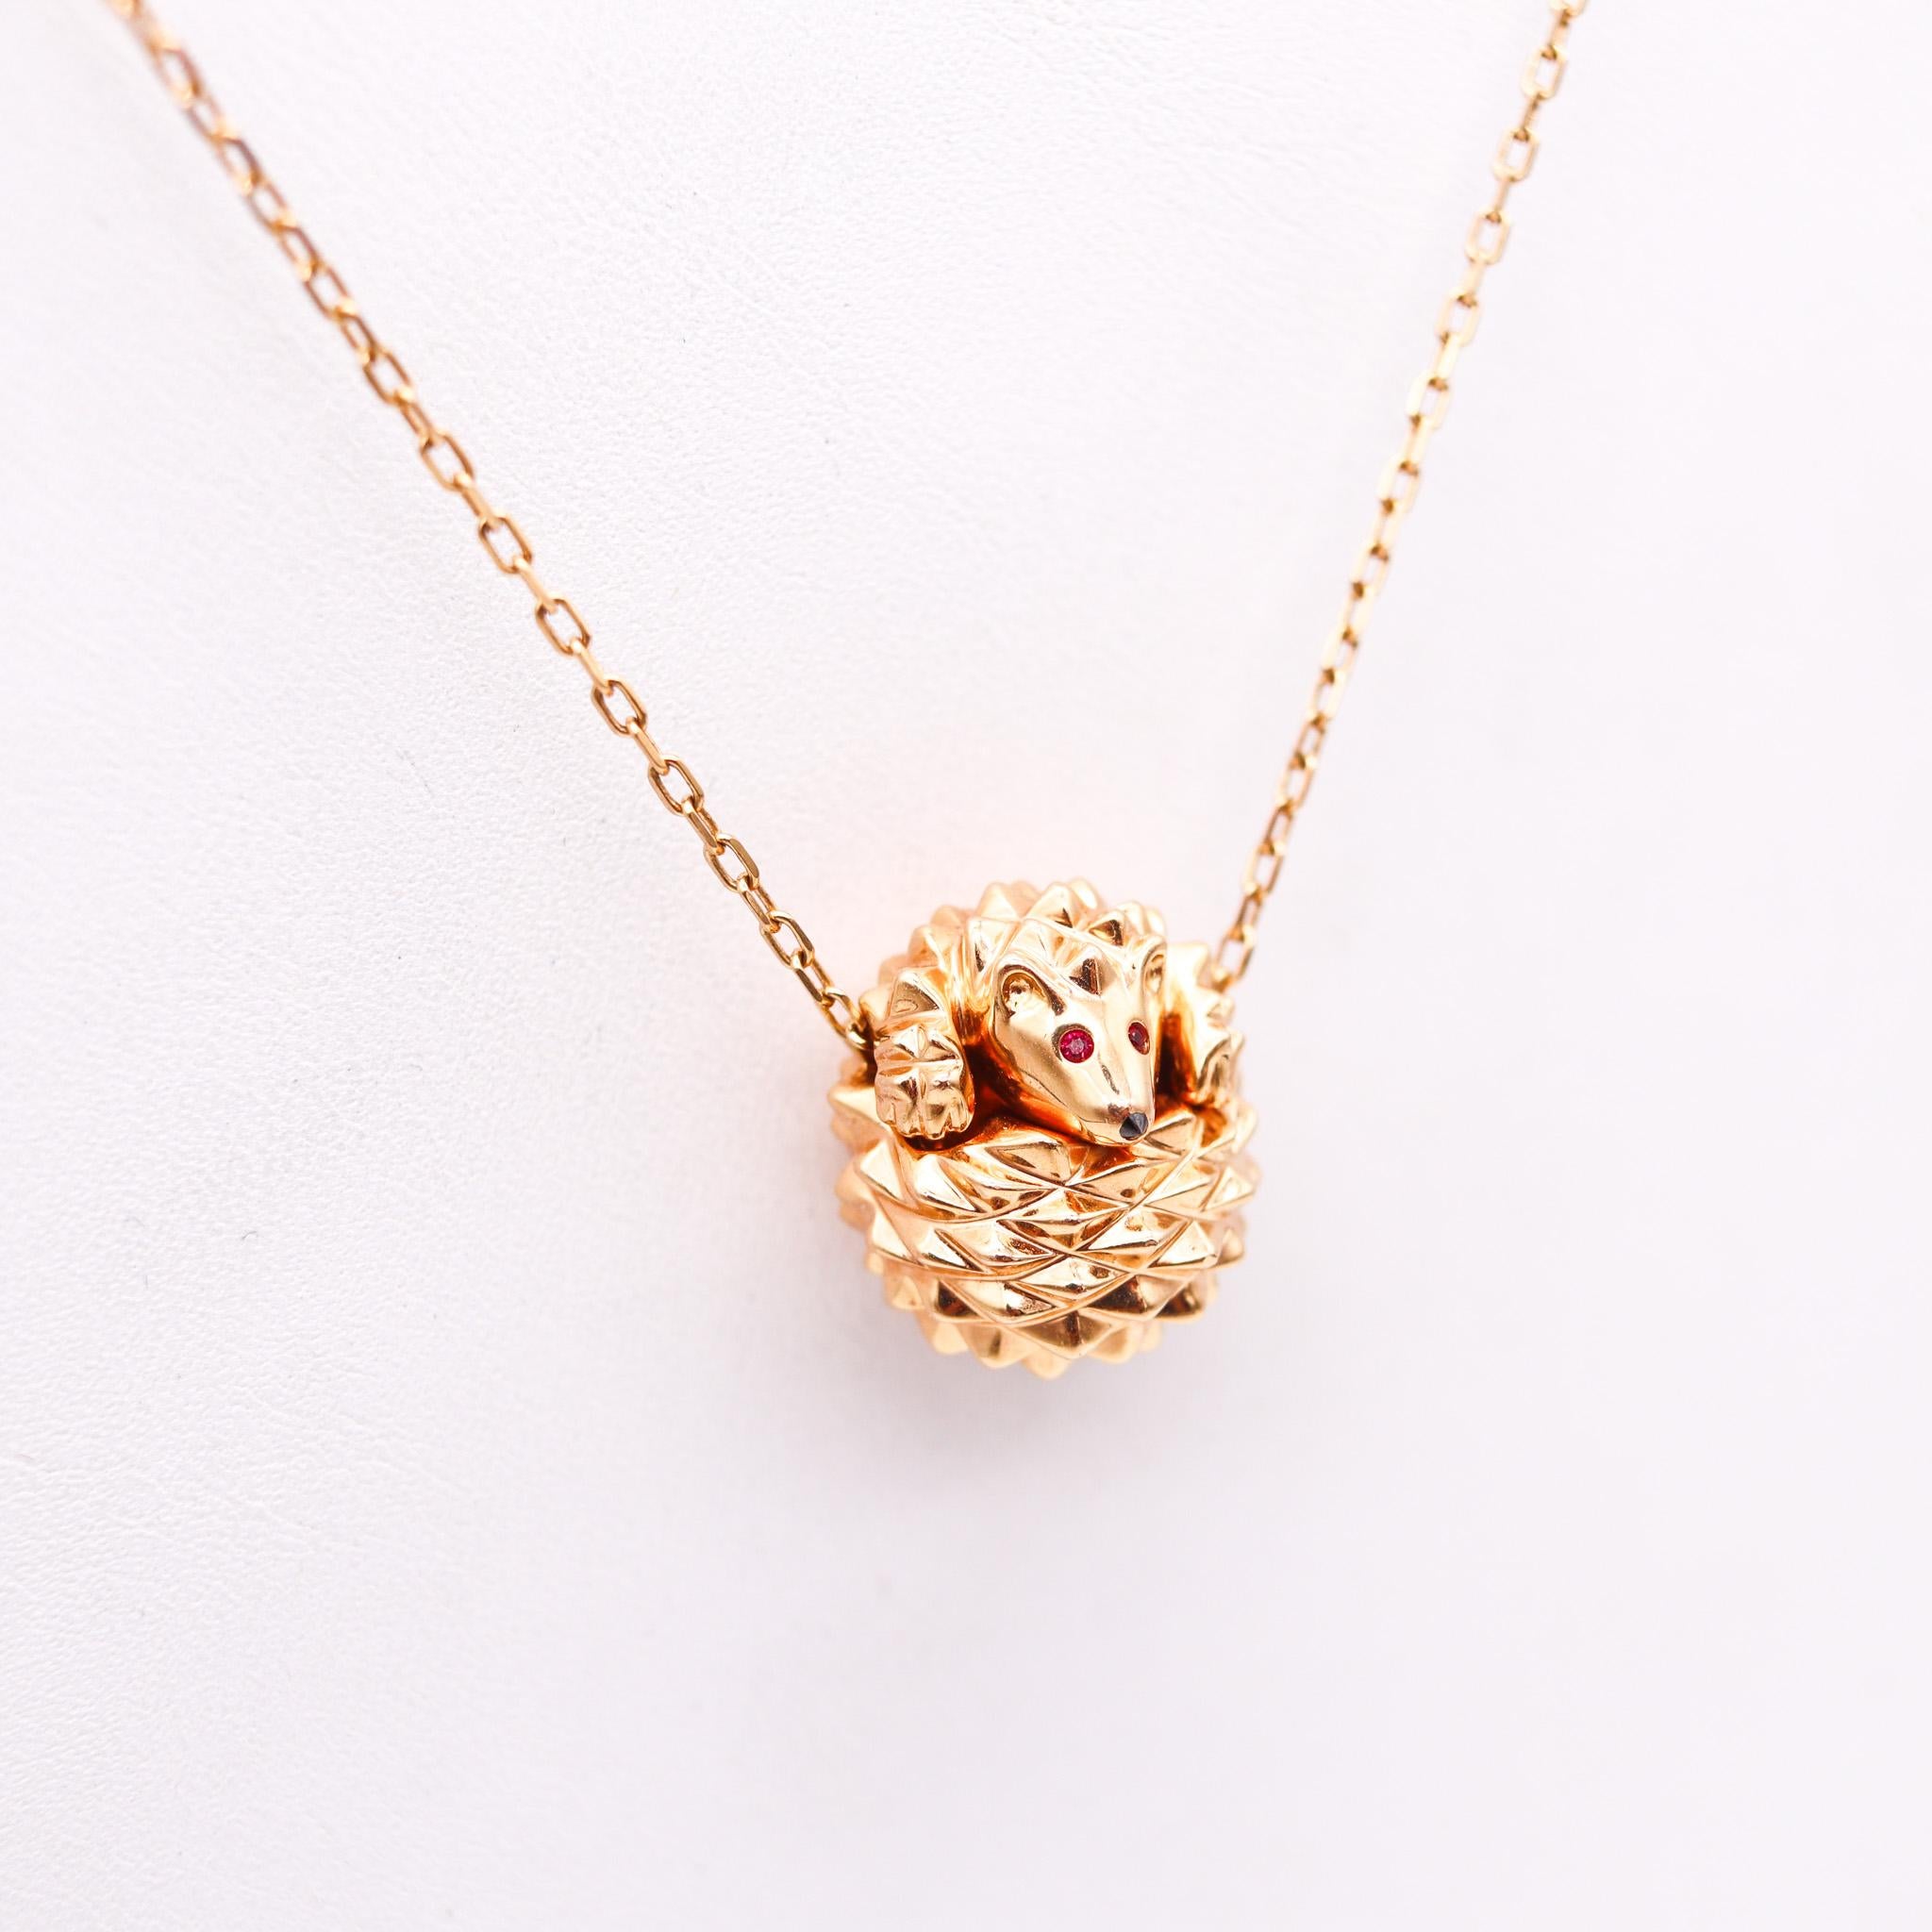 Hans, The Hedgehog necklace designed by Boucheron.

Beautiful chain necklace, created in Paris France by the jewelry house of Boucheron. The model of Hans, The Hedgehog was an original design by Solange Azagury, is very rare and very popular. The